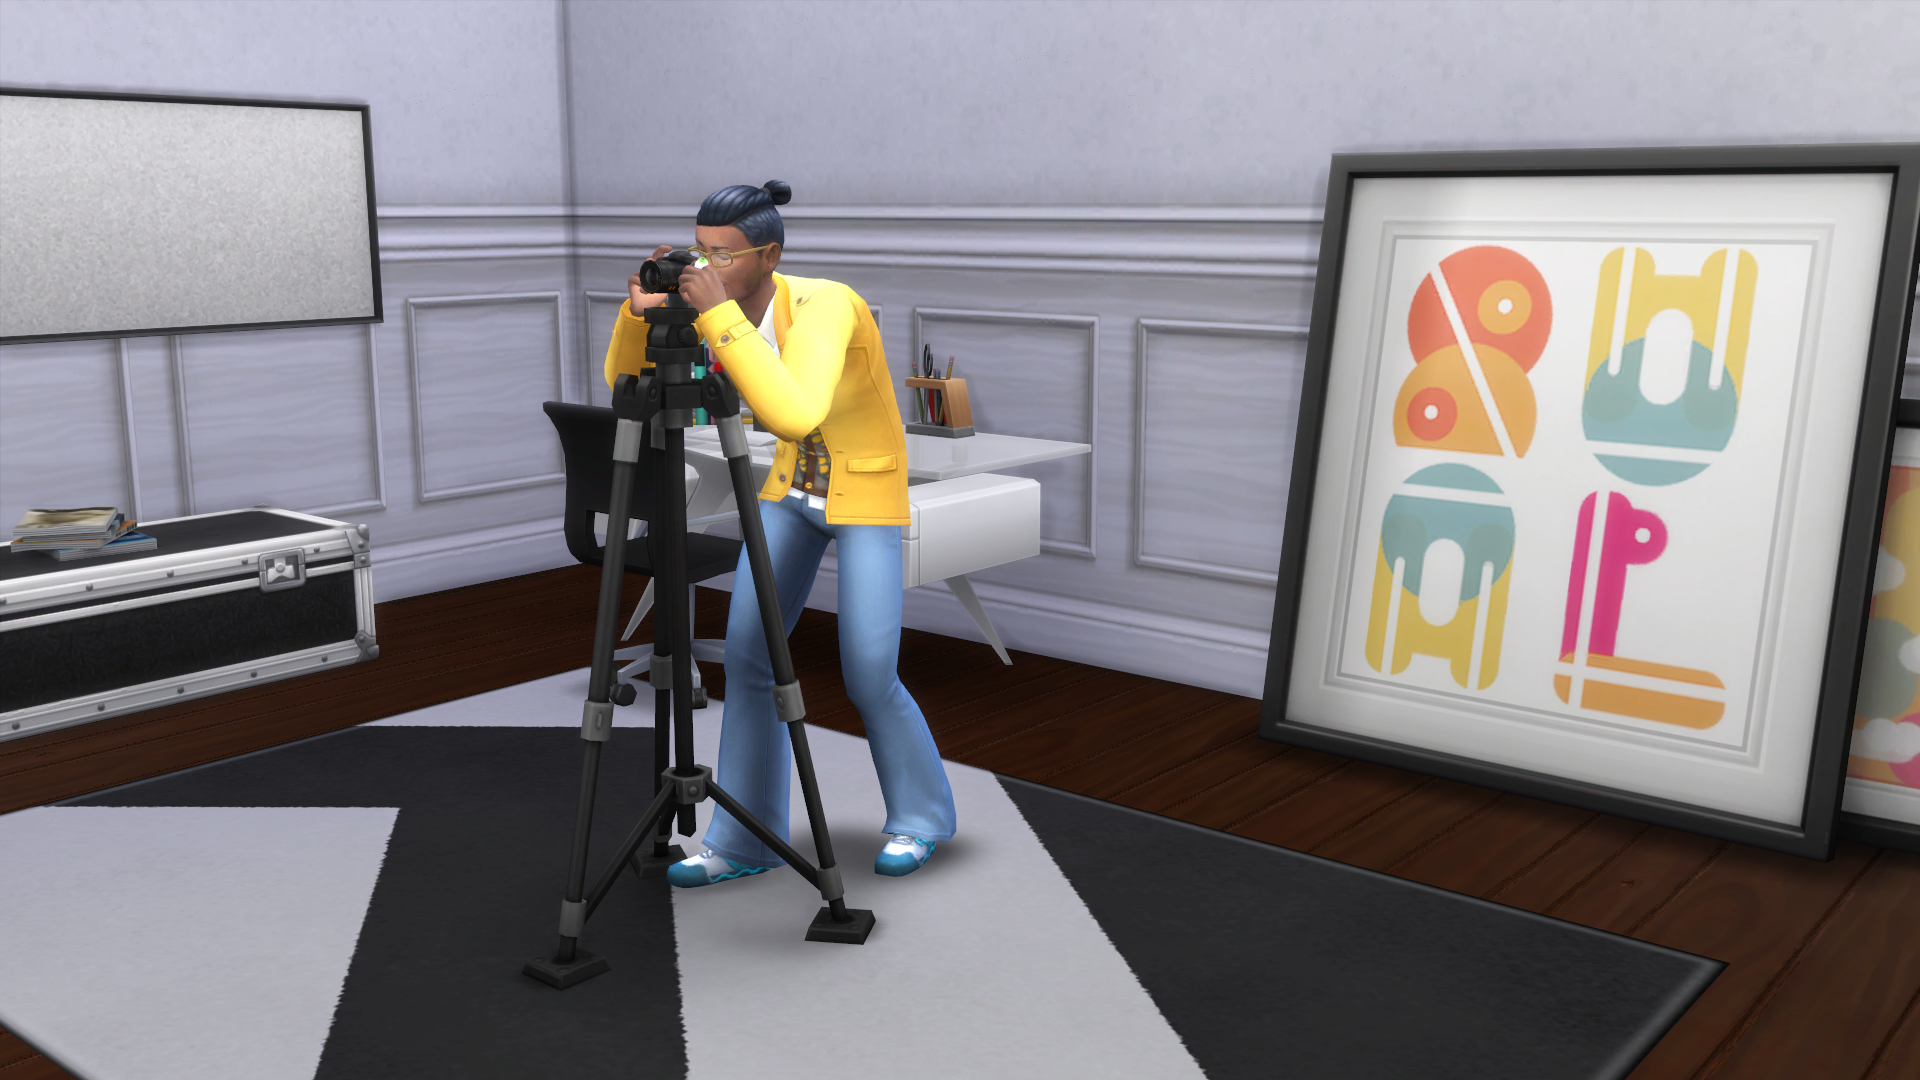 The Sims 4 Moschino Stuff: Photography 101